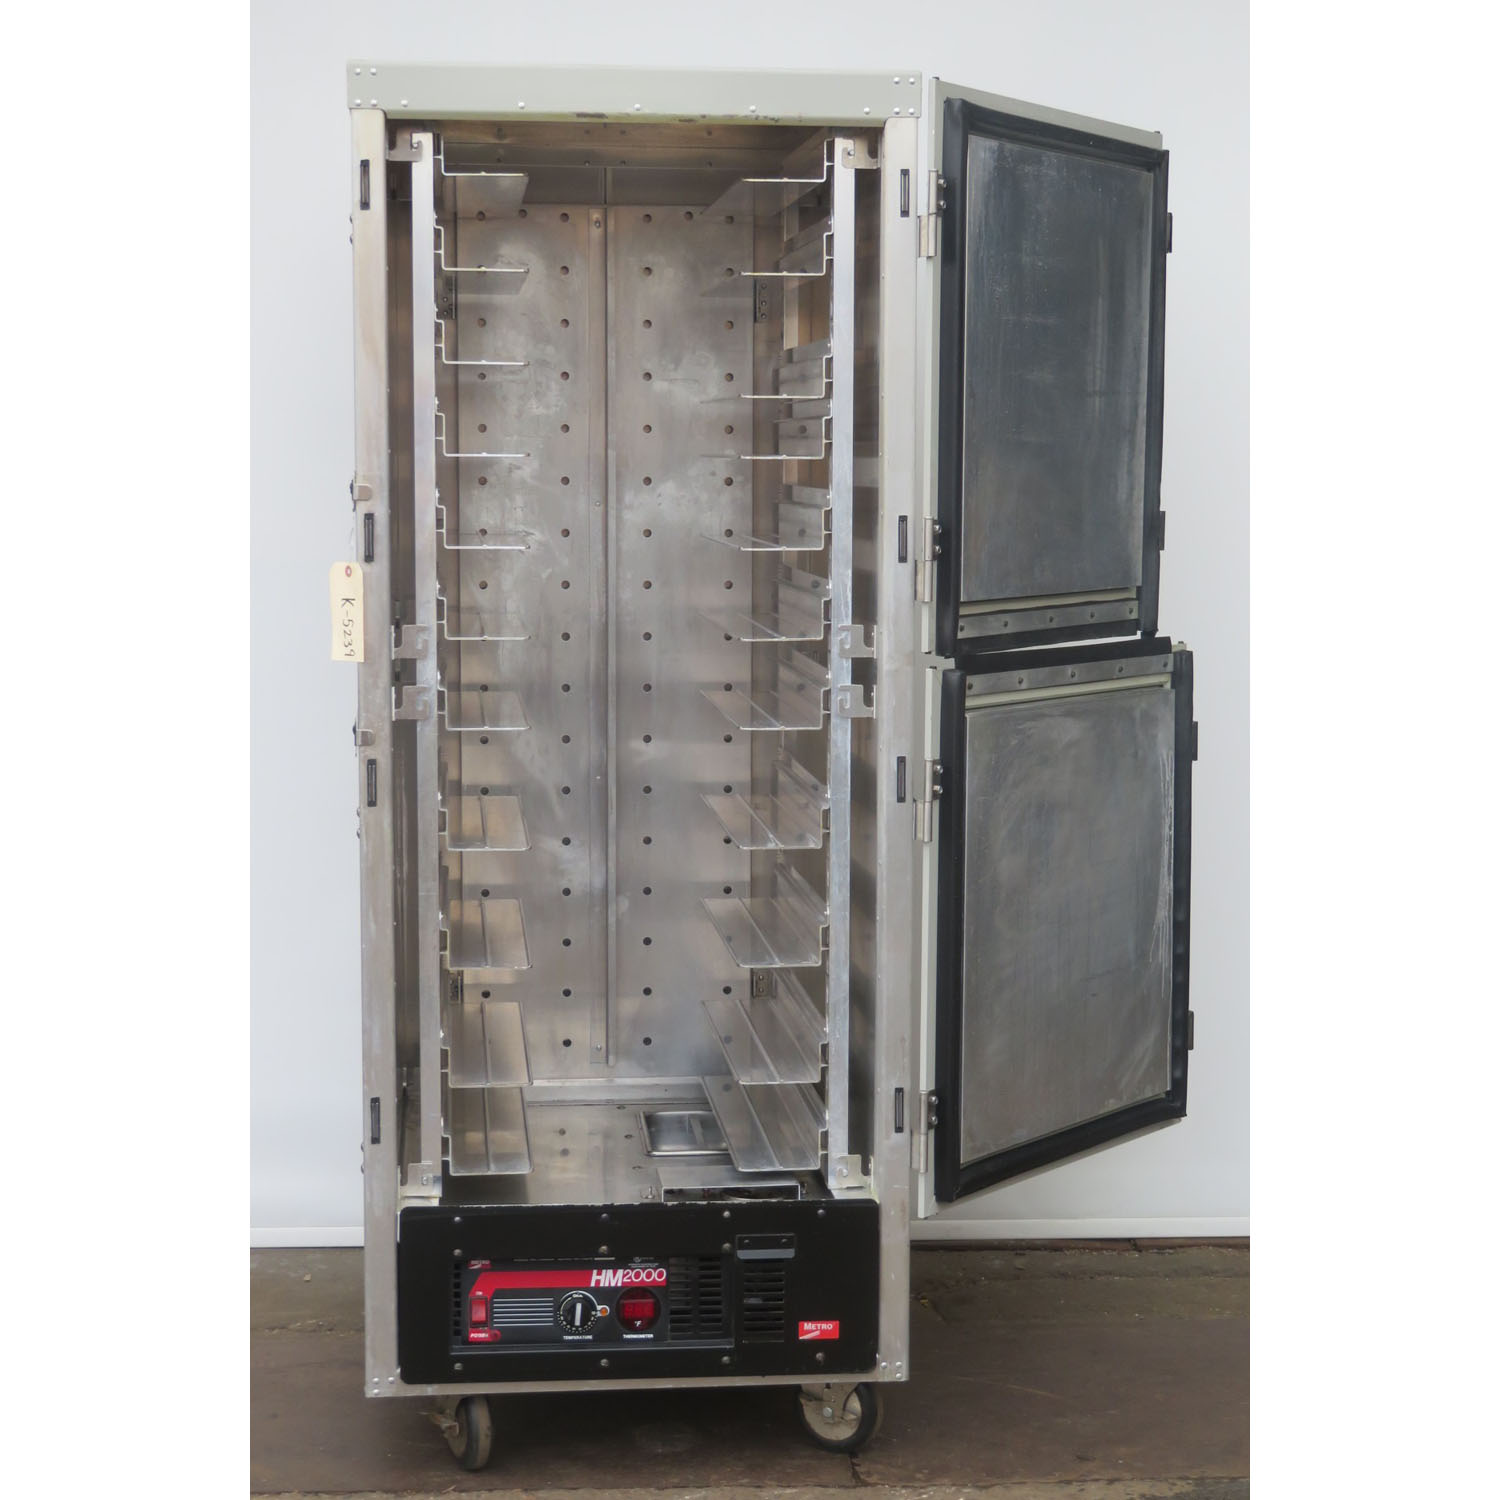 Metro C199-HM2000 Heating Cabinet Food Warmer, Used Very Good Condition image 1